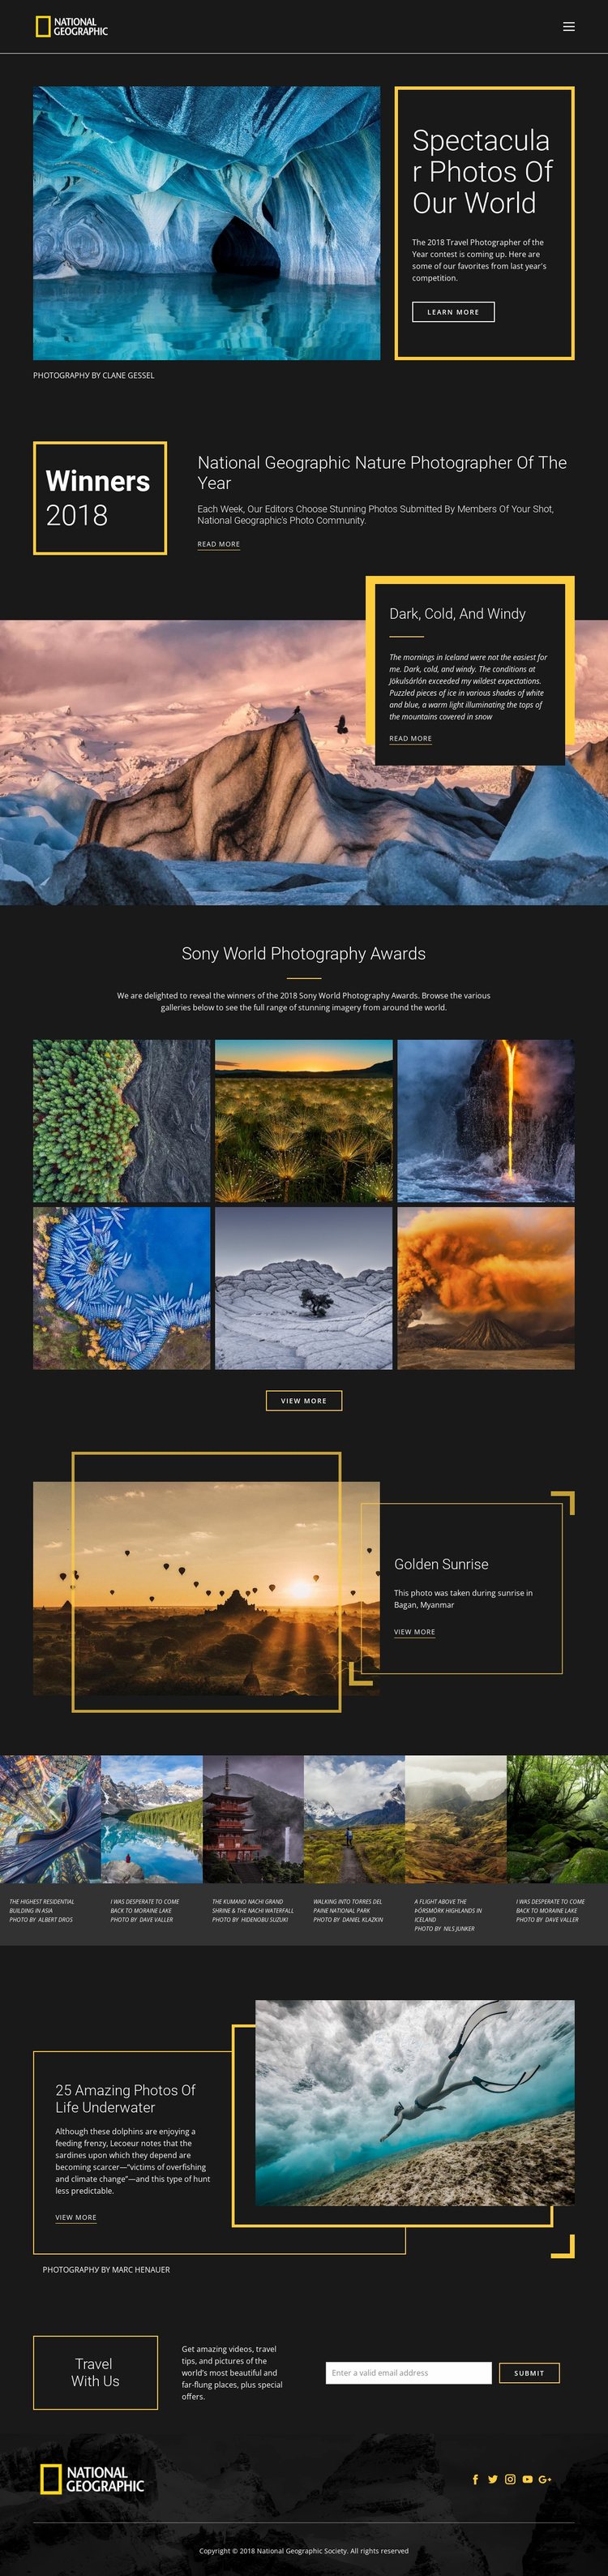 Pictures of nature Landing Page